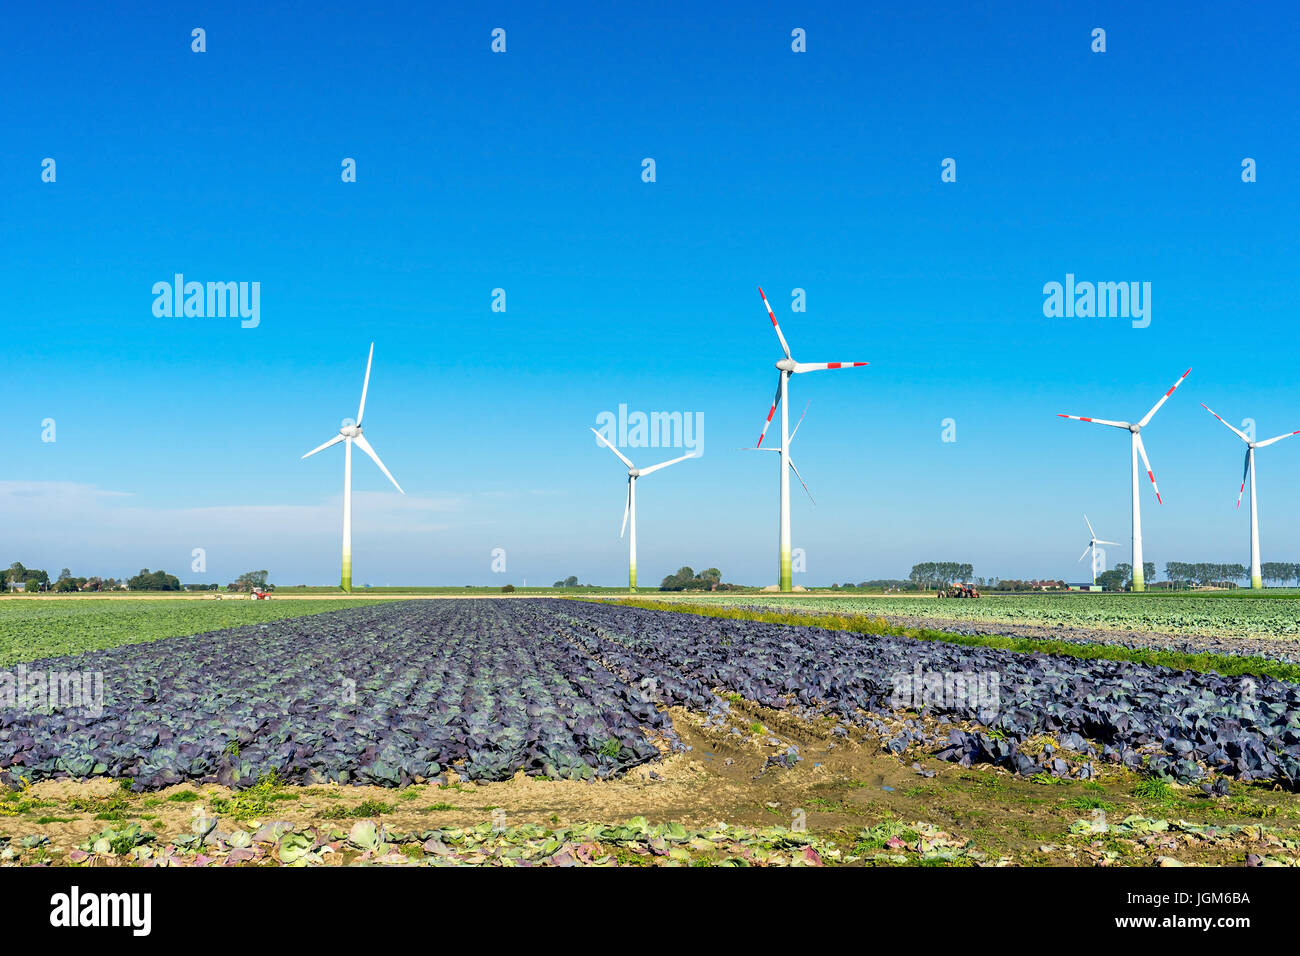 acre, arable land, dyke, Germany, Ditmarsh, harvests, erntemaschienen, friedrichskoog, char, agriculture, North Germany, red cabbage, Schleswig - Hols Stock Photo